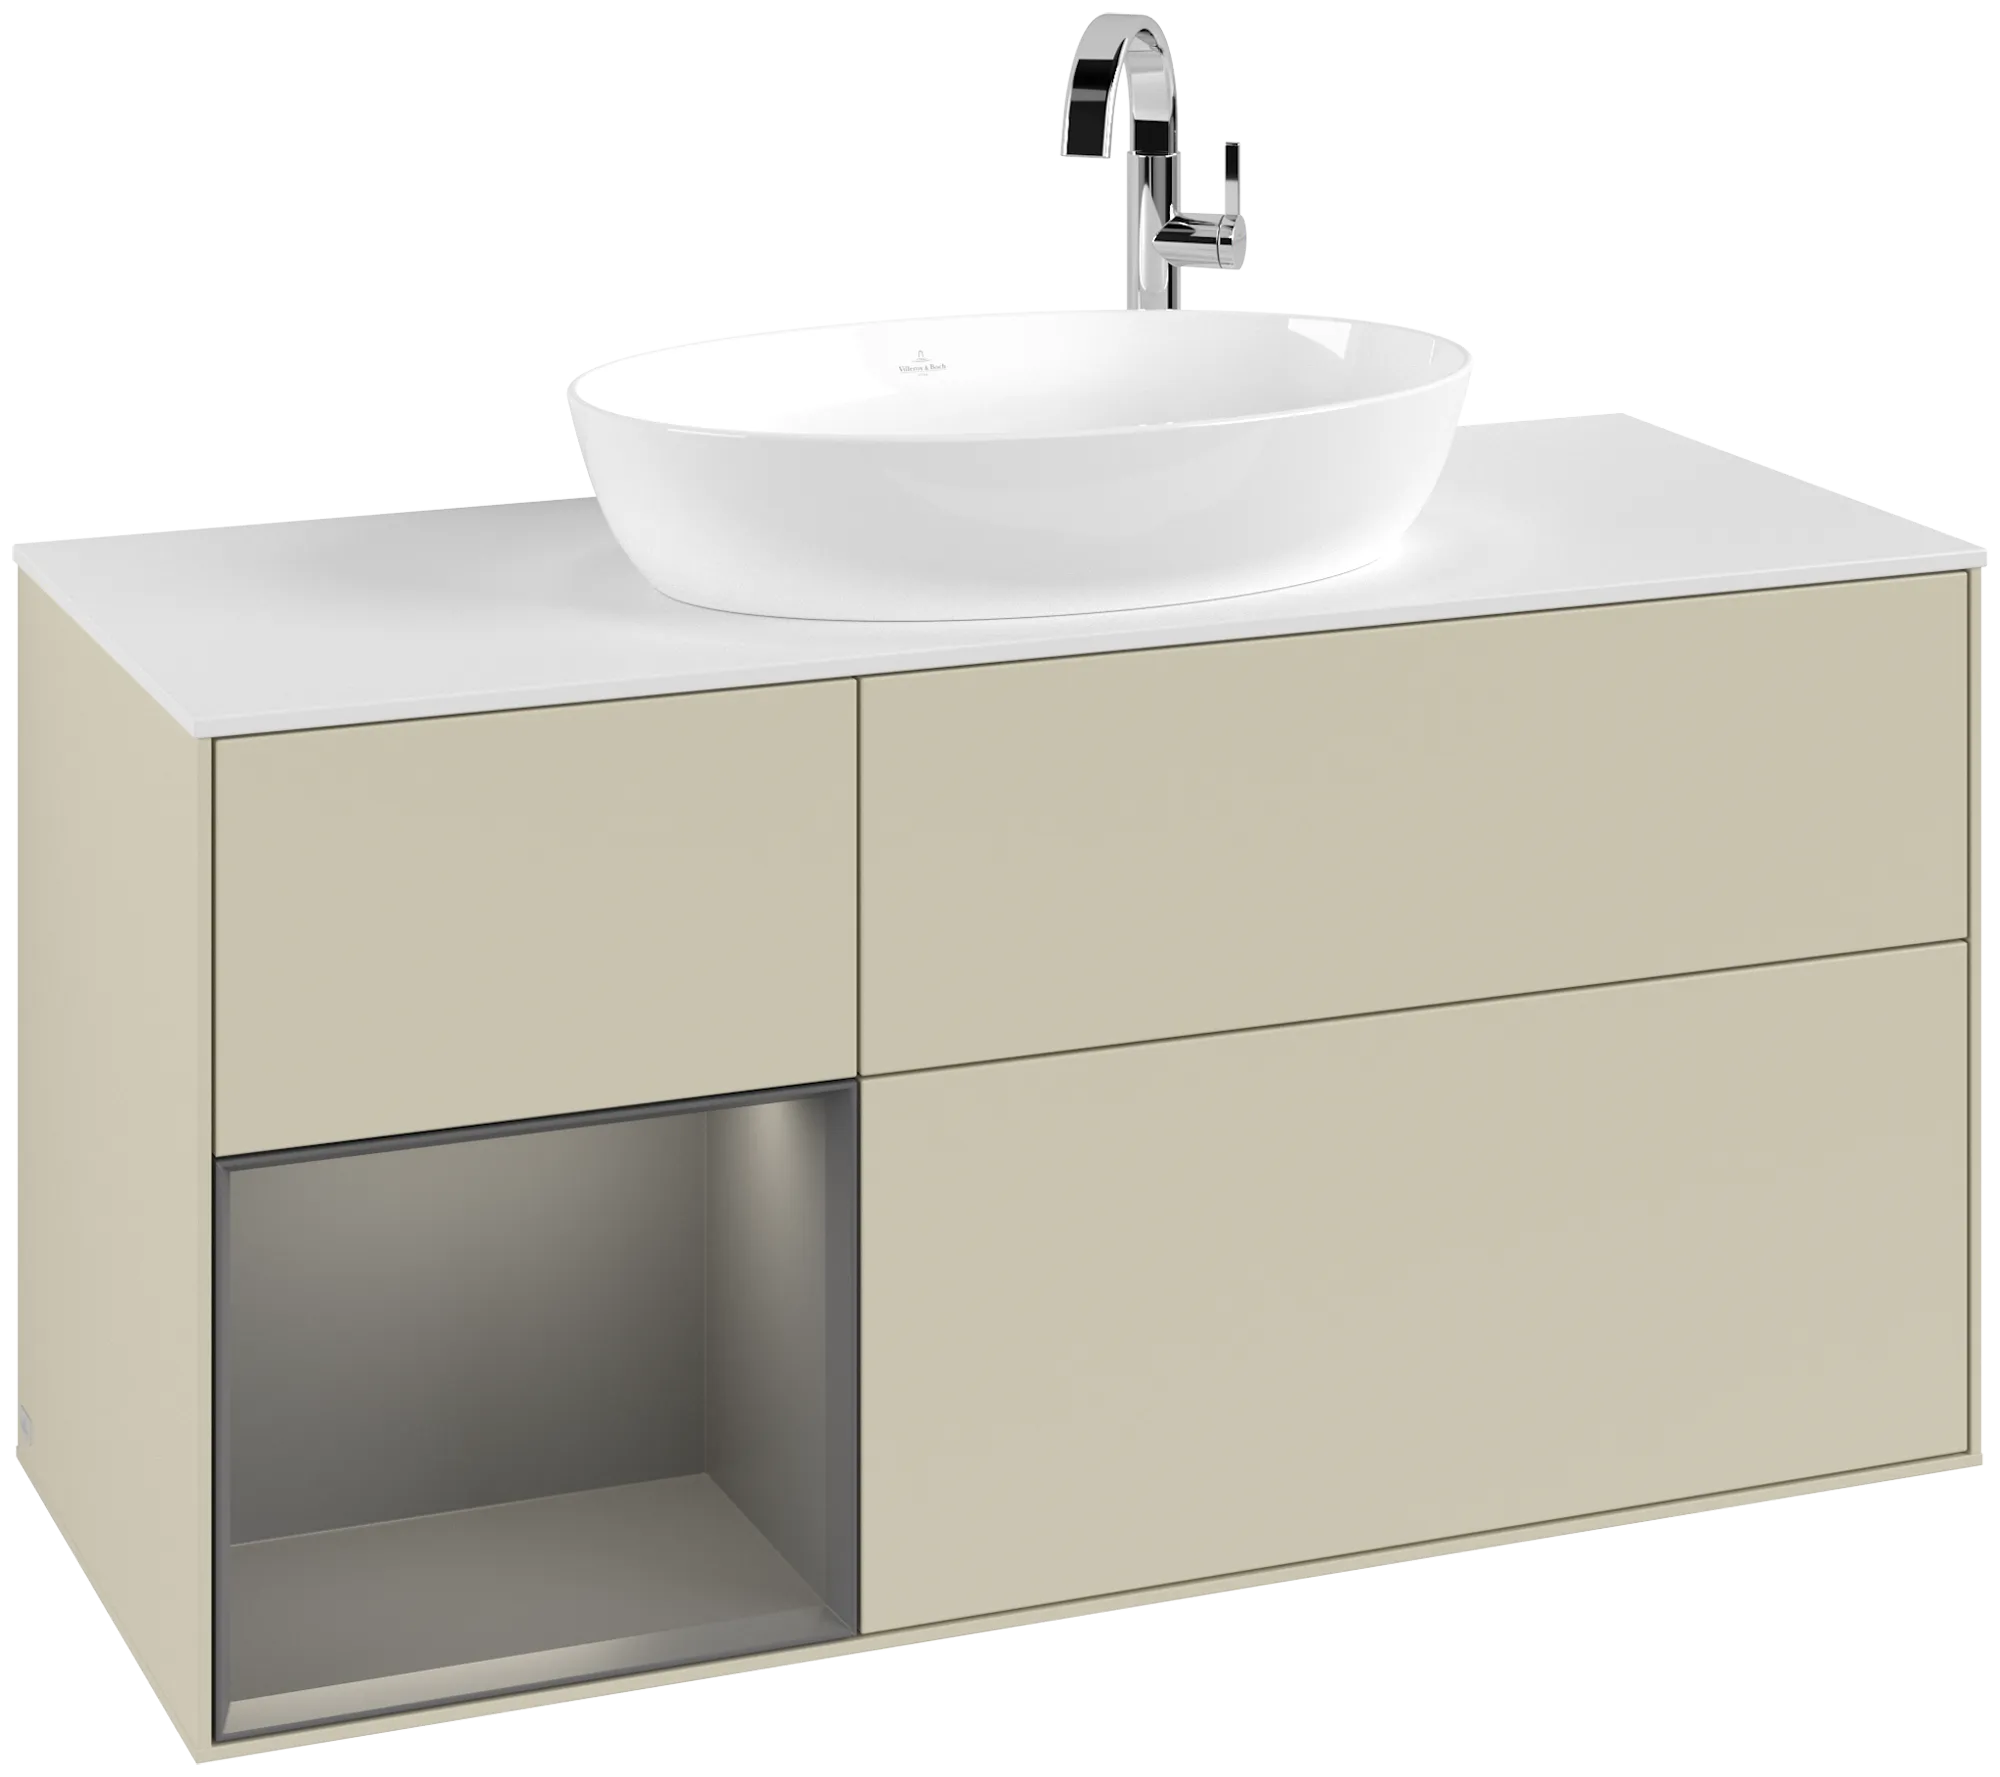 Picture of VILLEROY BOCH Finion Vanity unit, with lighting, 3 pull-out compartments, 1200 x 603 x 501 mm, Silk Grey Matt Lacquer / Anthracite Matt Lacquer / Glass White Matt #G941GKHJ